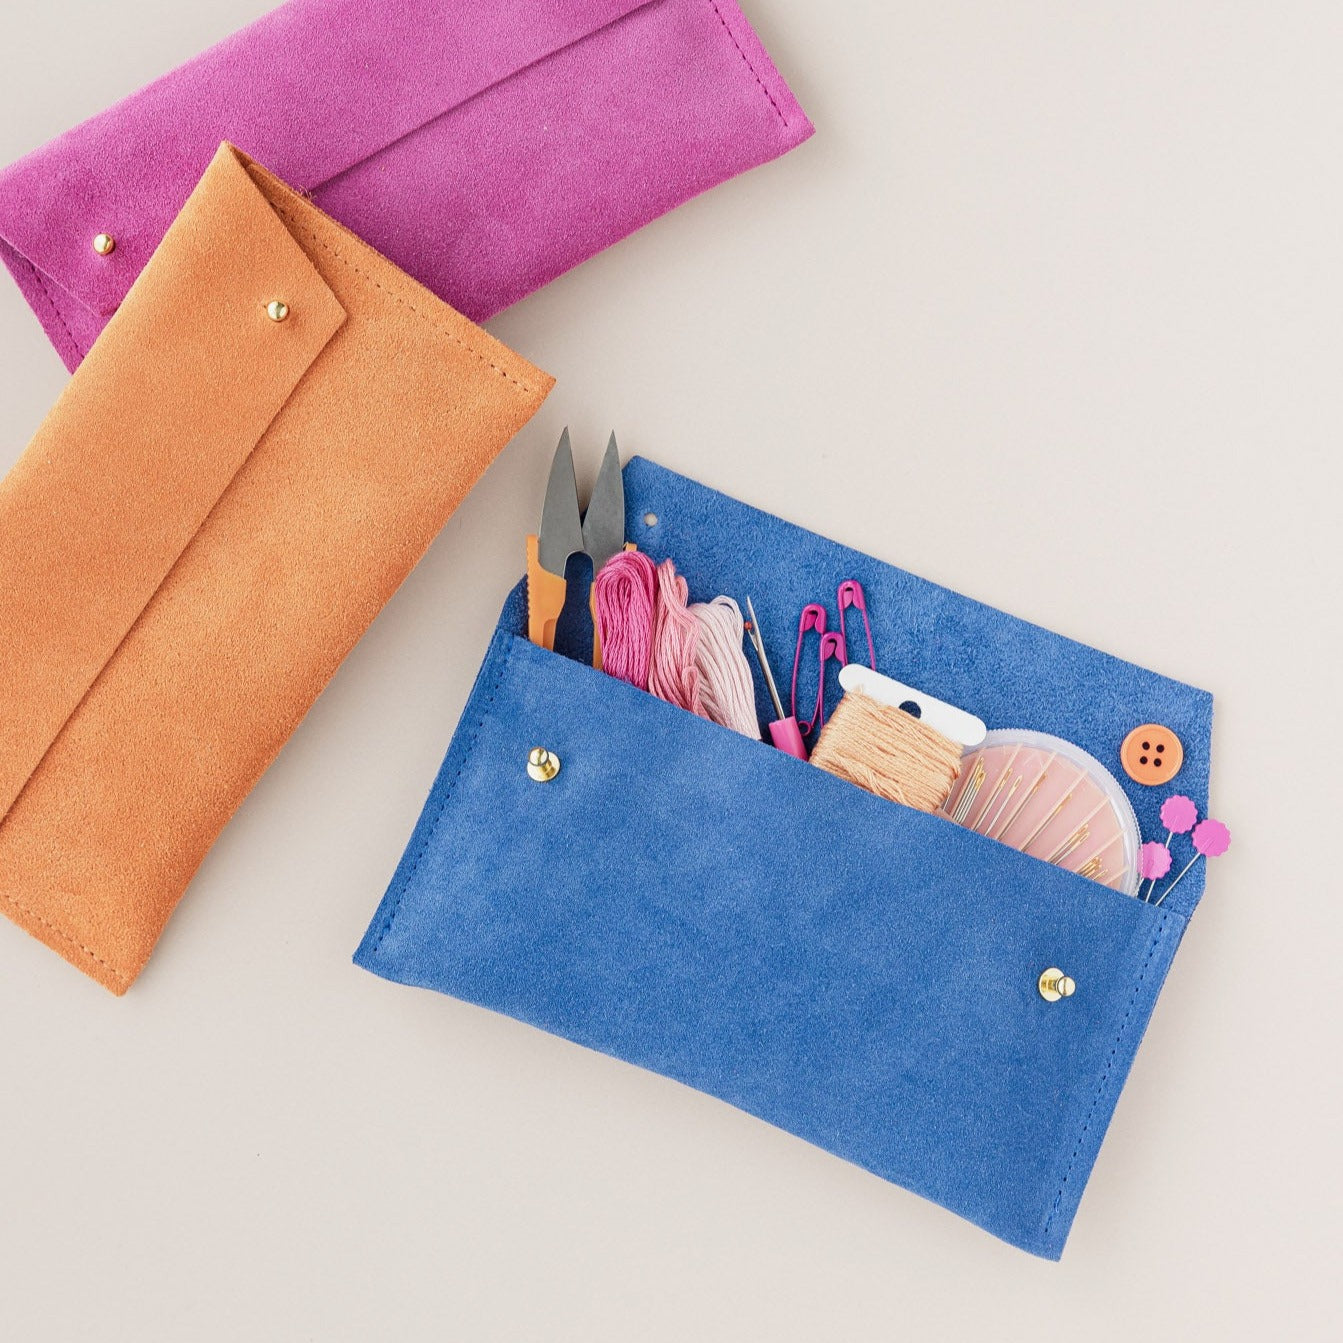 A selection of suede Notions Pouches in Fuchsia, Orange and Cobalt. Full with sewing notions. 